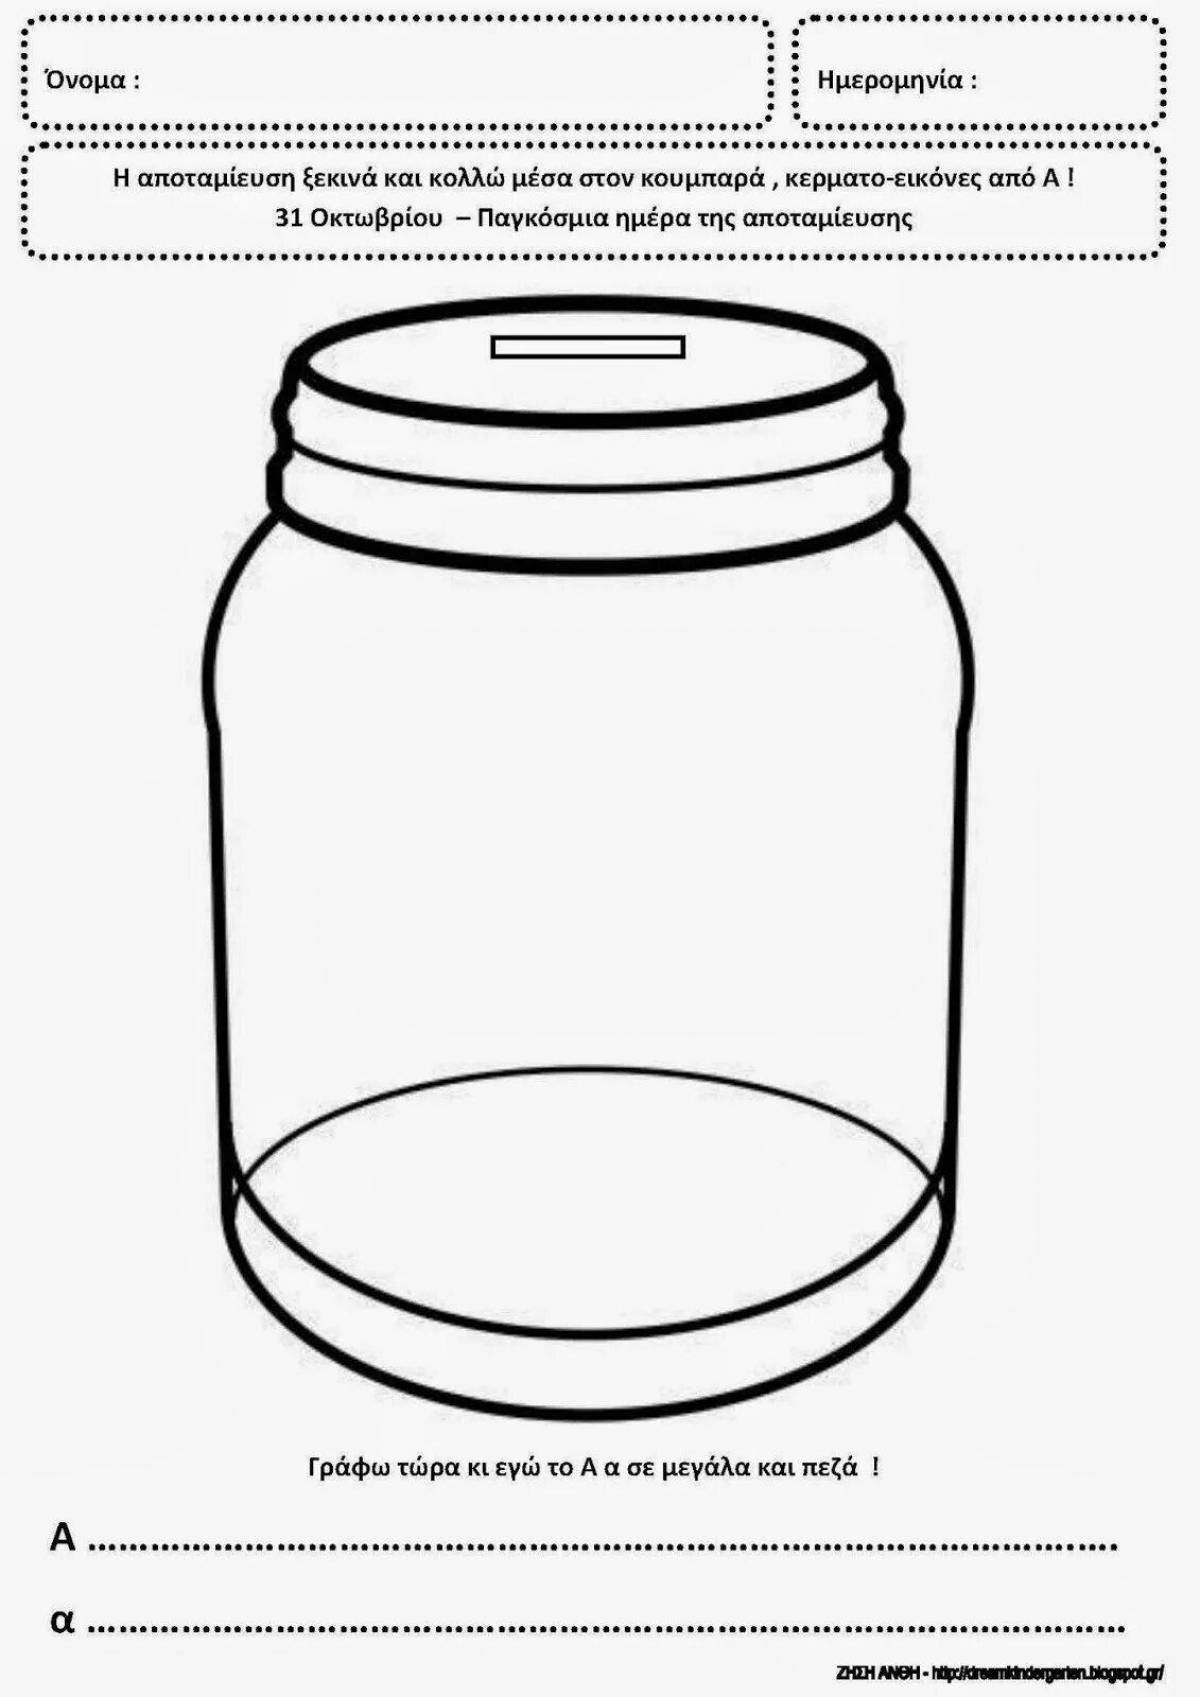 Cute empty glass jar coloring book for kids